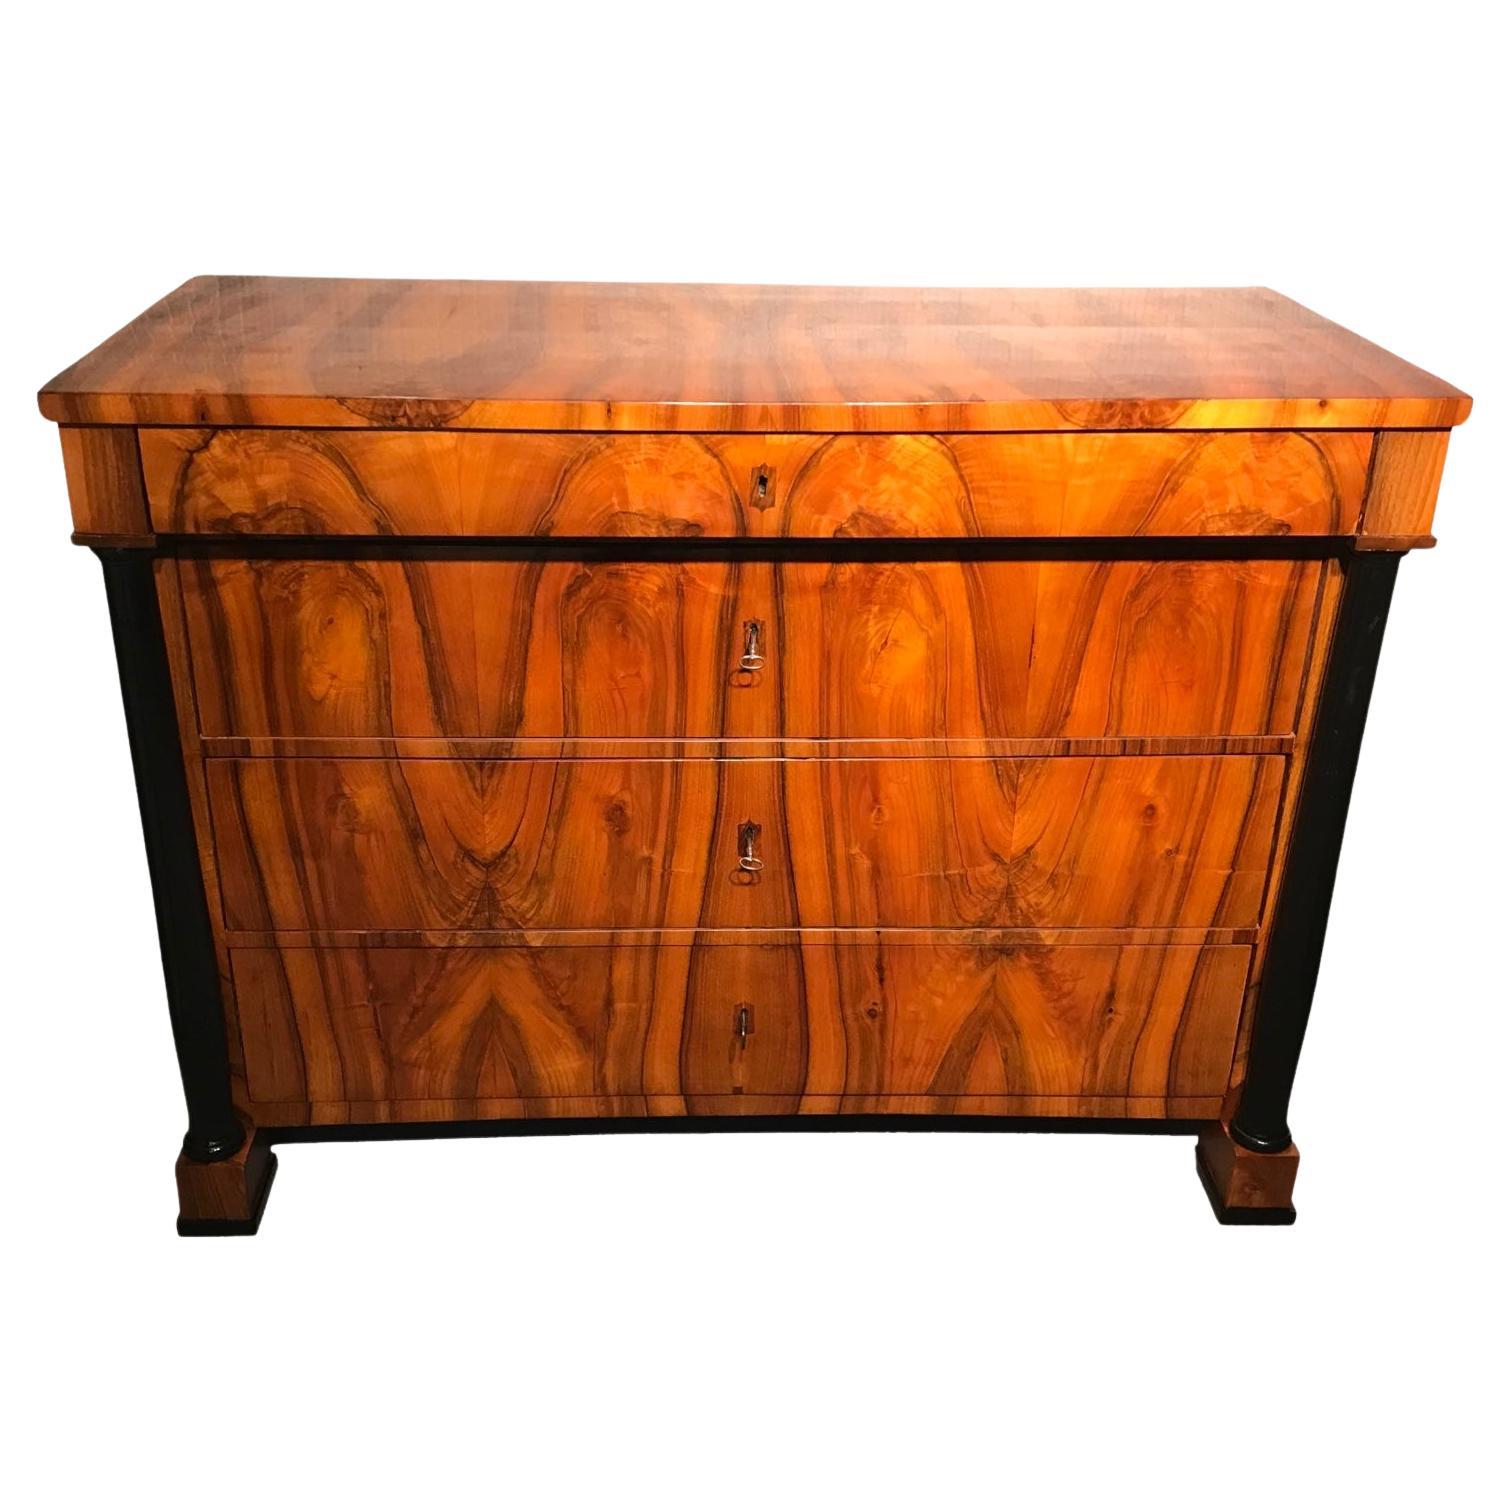 Exquisite Biedermeier Walnut Dresser from 1820, Southern Germany. This remarkable Biedermeier chest of drawers, dating back to 1820 and originating from Southern Germany, is a true testament to craftsmanship and timeless beauty. Standing on four